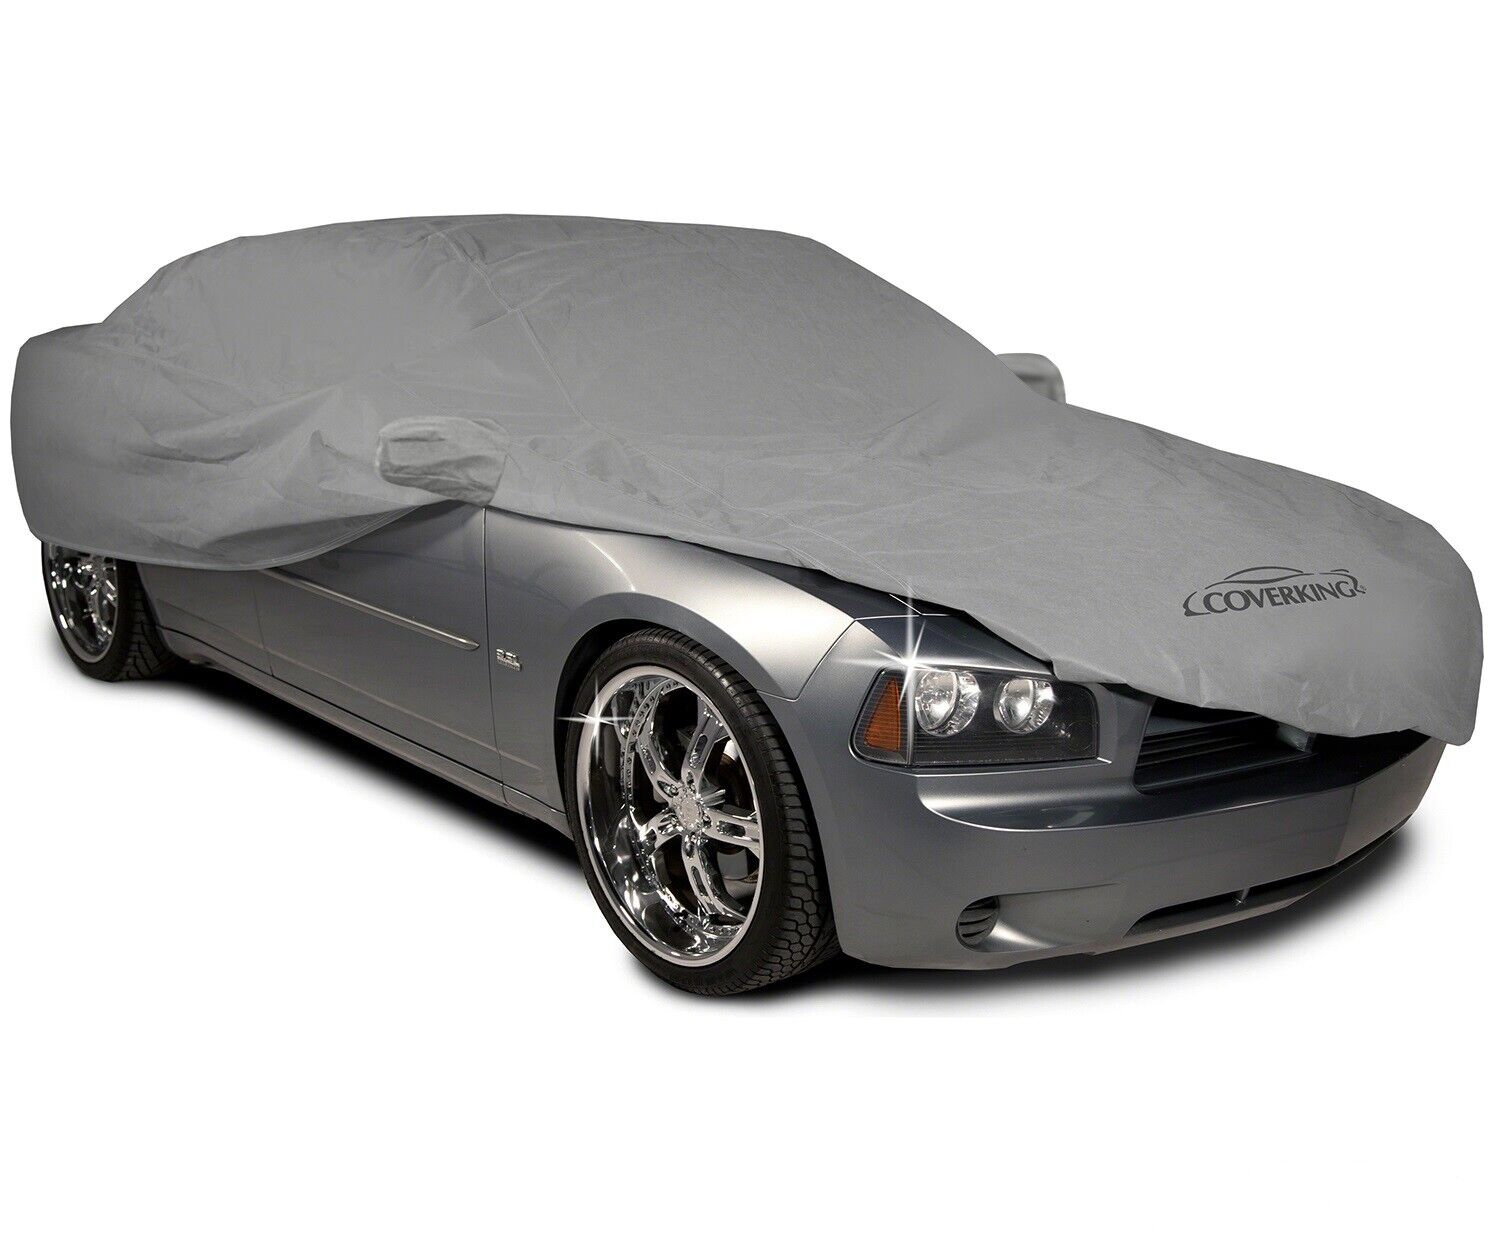 Coverking Coverbond-4 Tailored Car Cover for Dodge Challenger - 4 Thick Layers